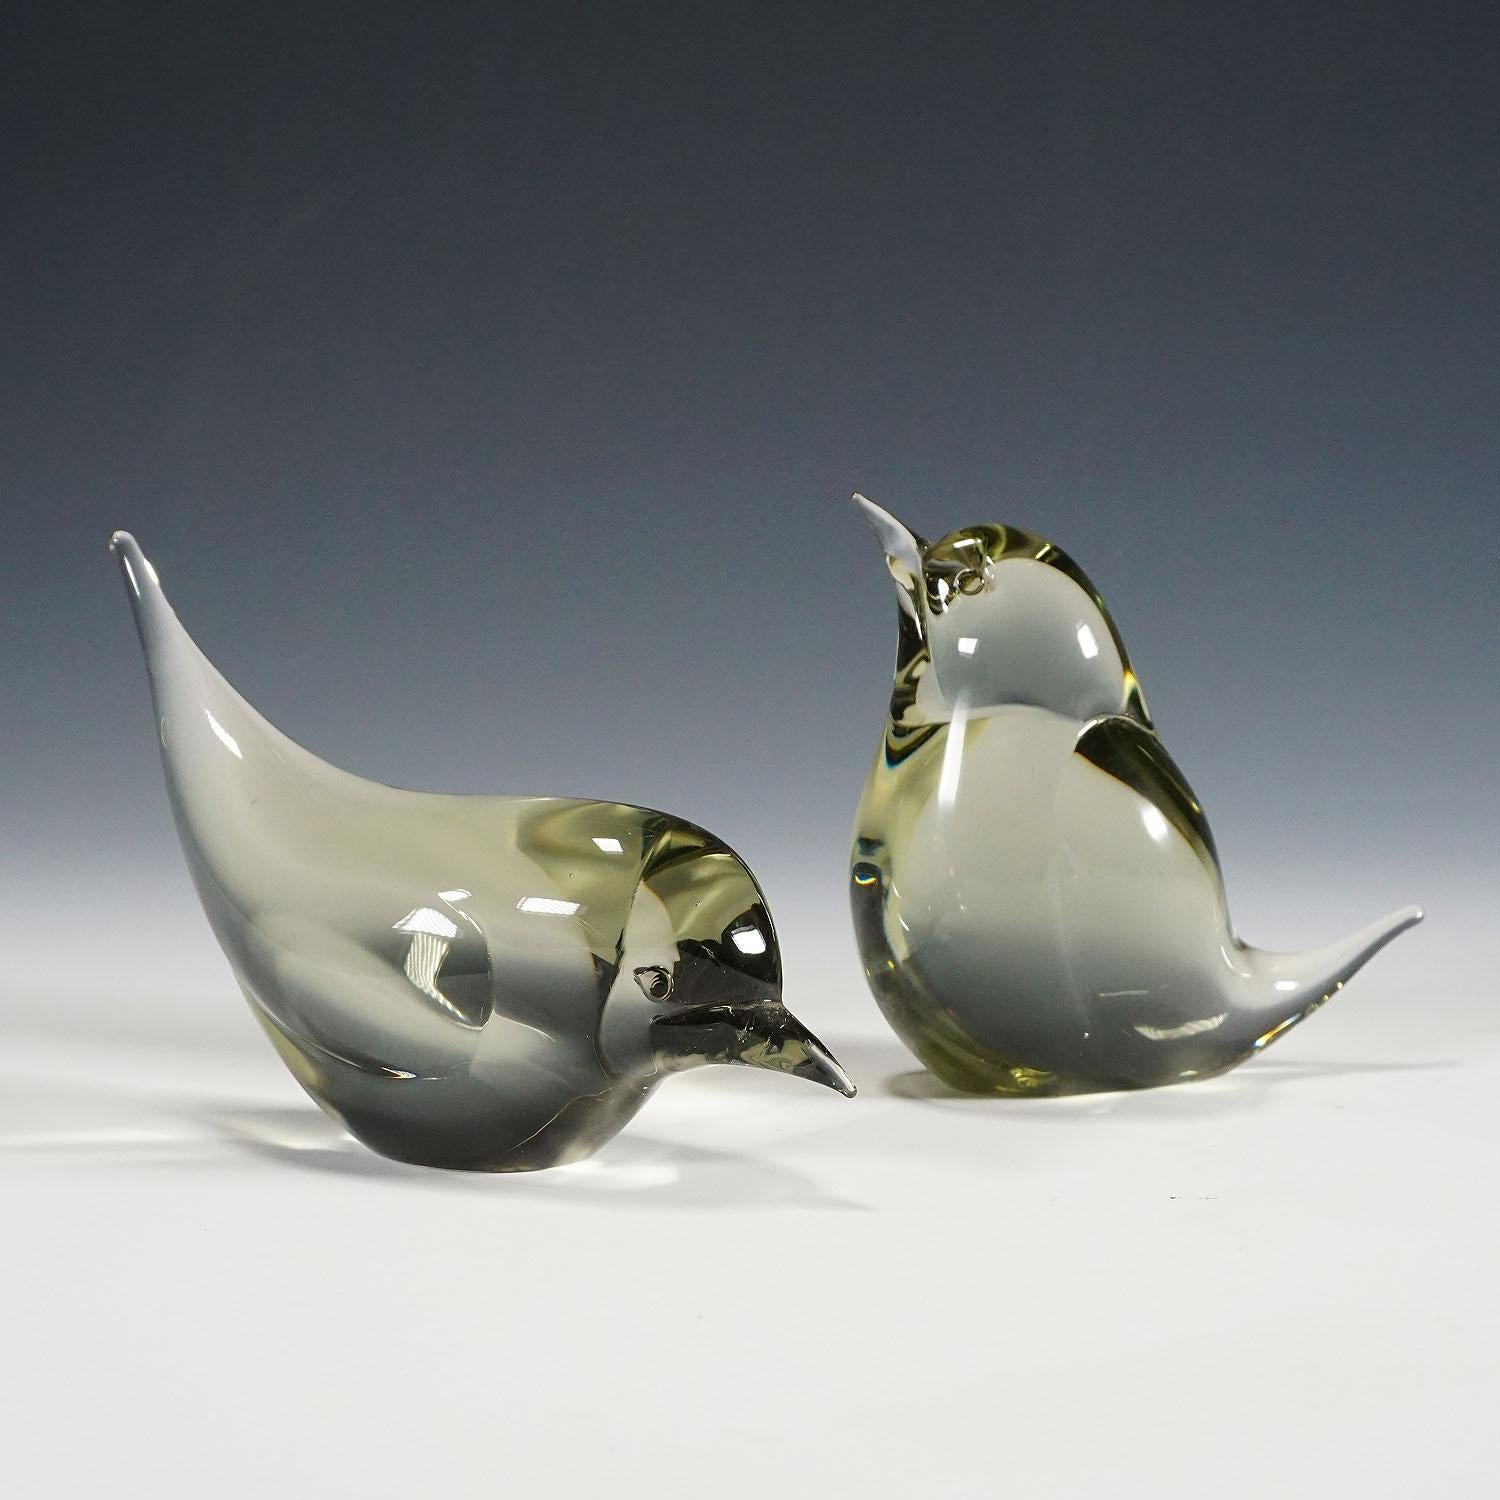 A pair stylized sculptures of little birds in smoke grey glass. They are handmade in the gral glass manufactory, Germany. Designed by Livio Seguso, circa 1970. Base with incised signatures of the artist (LS) and factory lables.

Lit.: gralglas